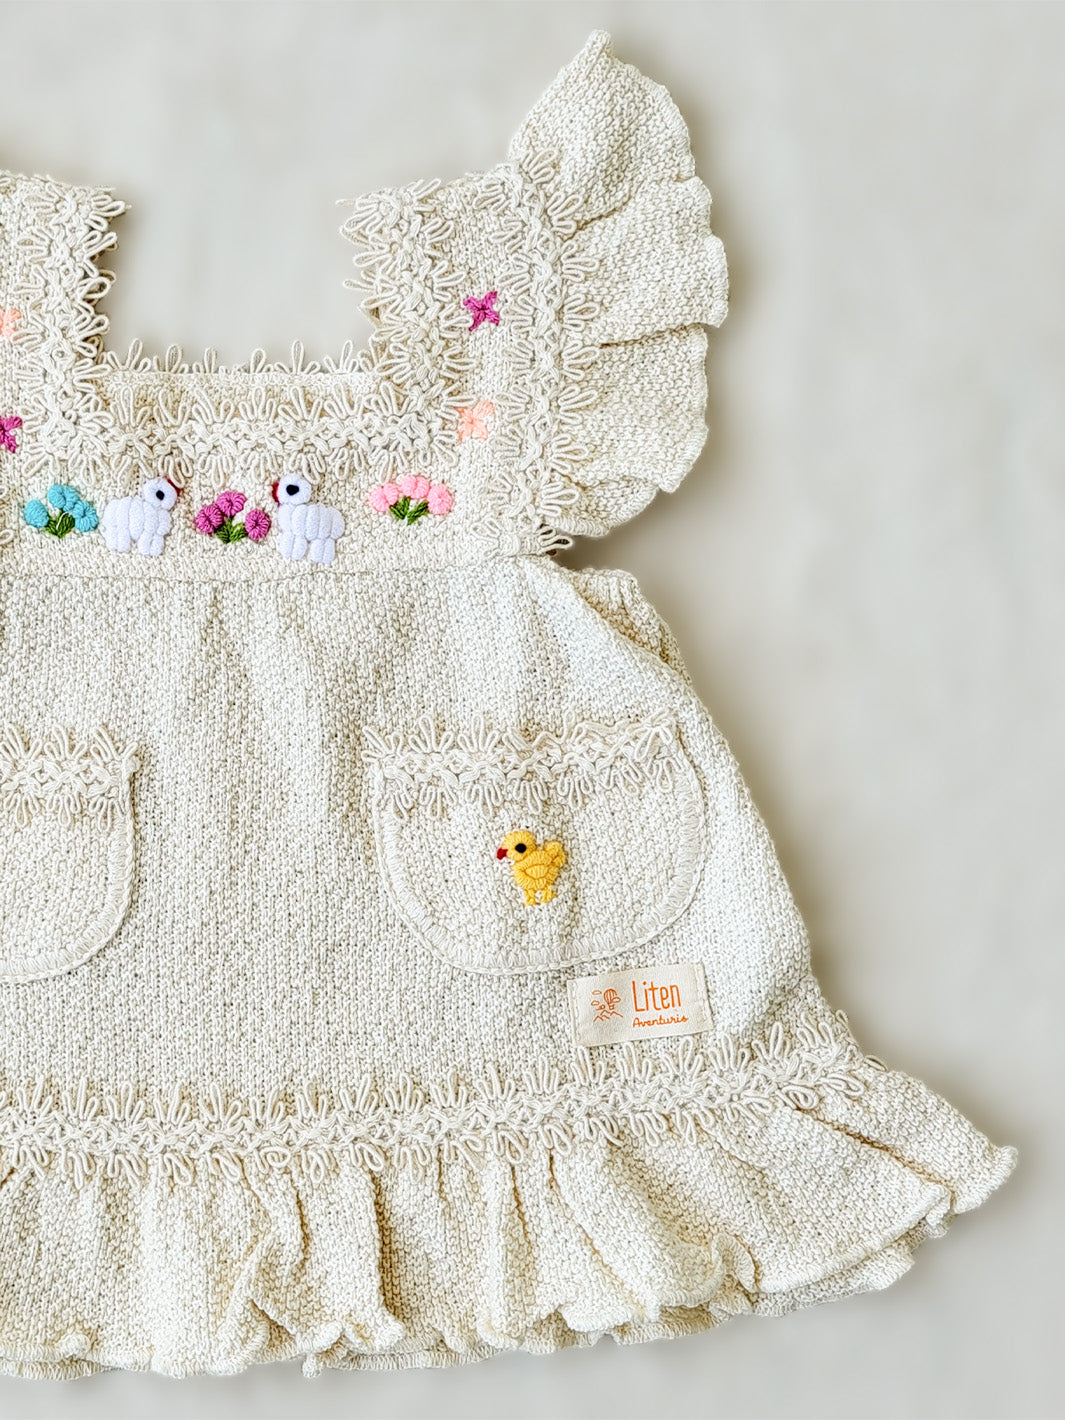 Liten Aventuris Collections. Experience the beauty of nature in the Elvita Dress! Hand-embroidered animals, flowers, and knitted cotton lace come together to create a whimsical look your little girl will love. With a snug A-line fit and playful butterfly sleeves, this dress is perfect for every outdoor adventure she can come up with. Nature’s beauty is literally at her fingertips! Made of natural peruvian knitted cotton, Ethically made in Peru. Ekologisk klänning för flickor och bebisar.